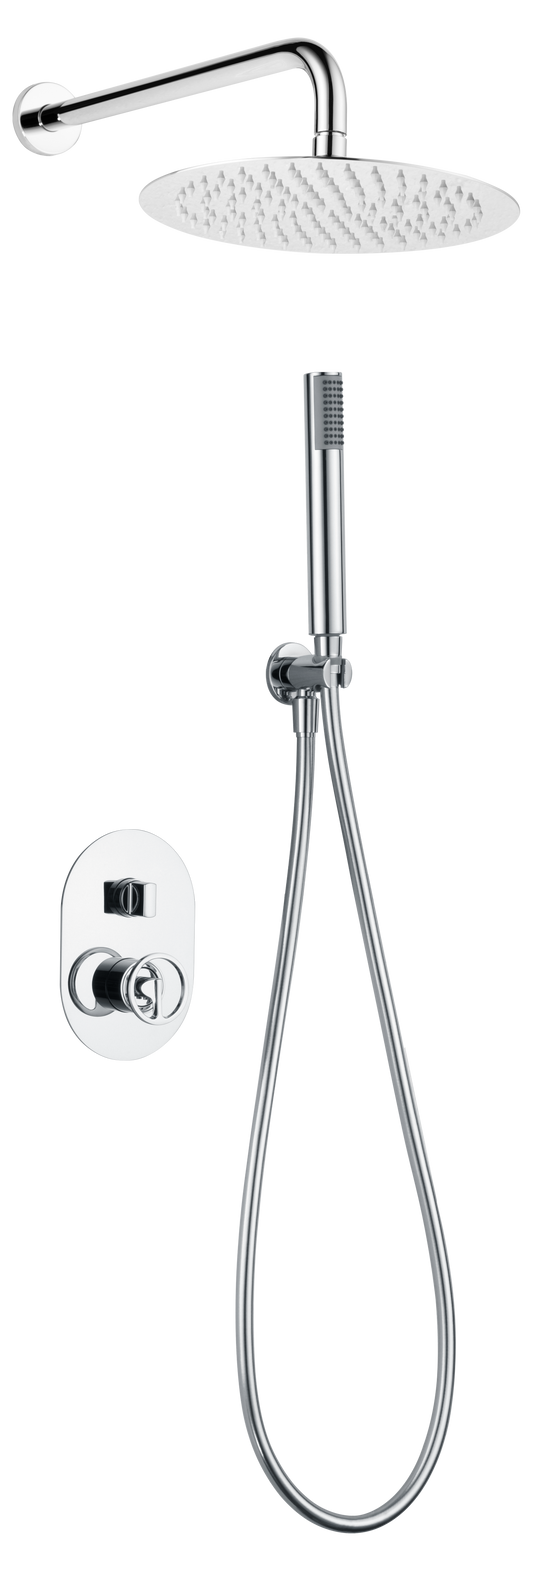 Olimpo chrome built-in shower set faucets by Imex 